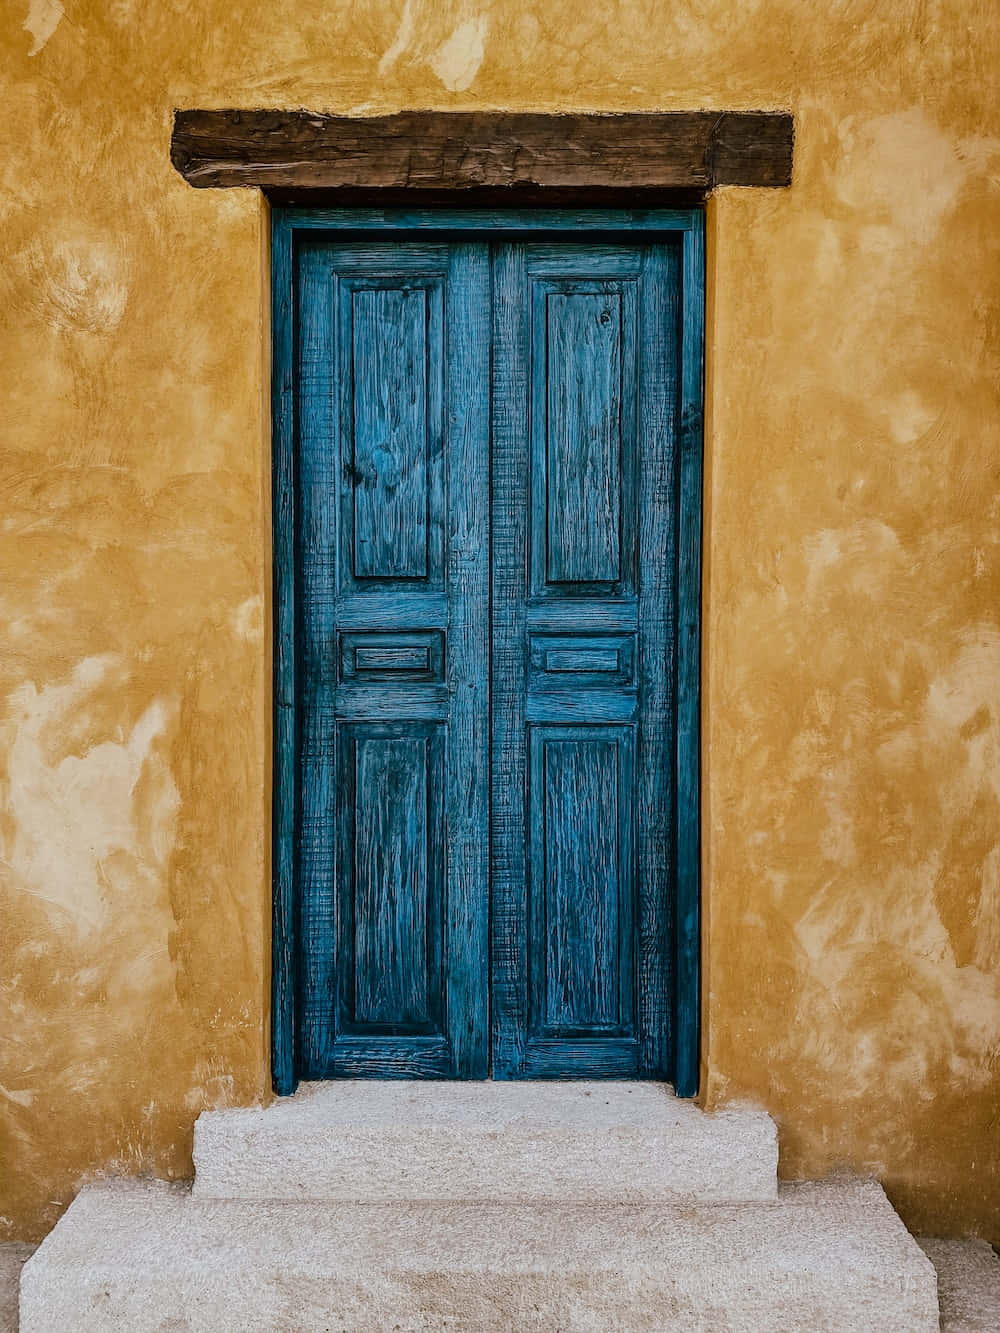 A Blue Door On A Yellow Building